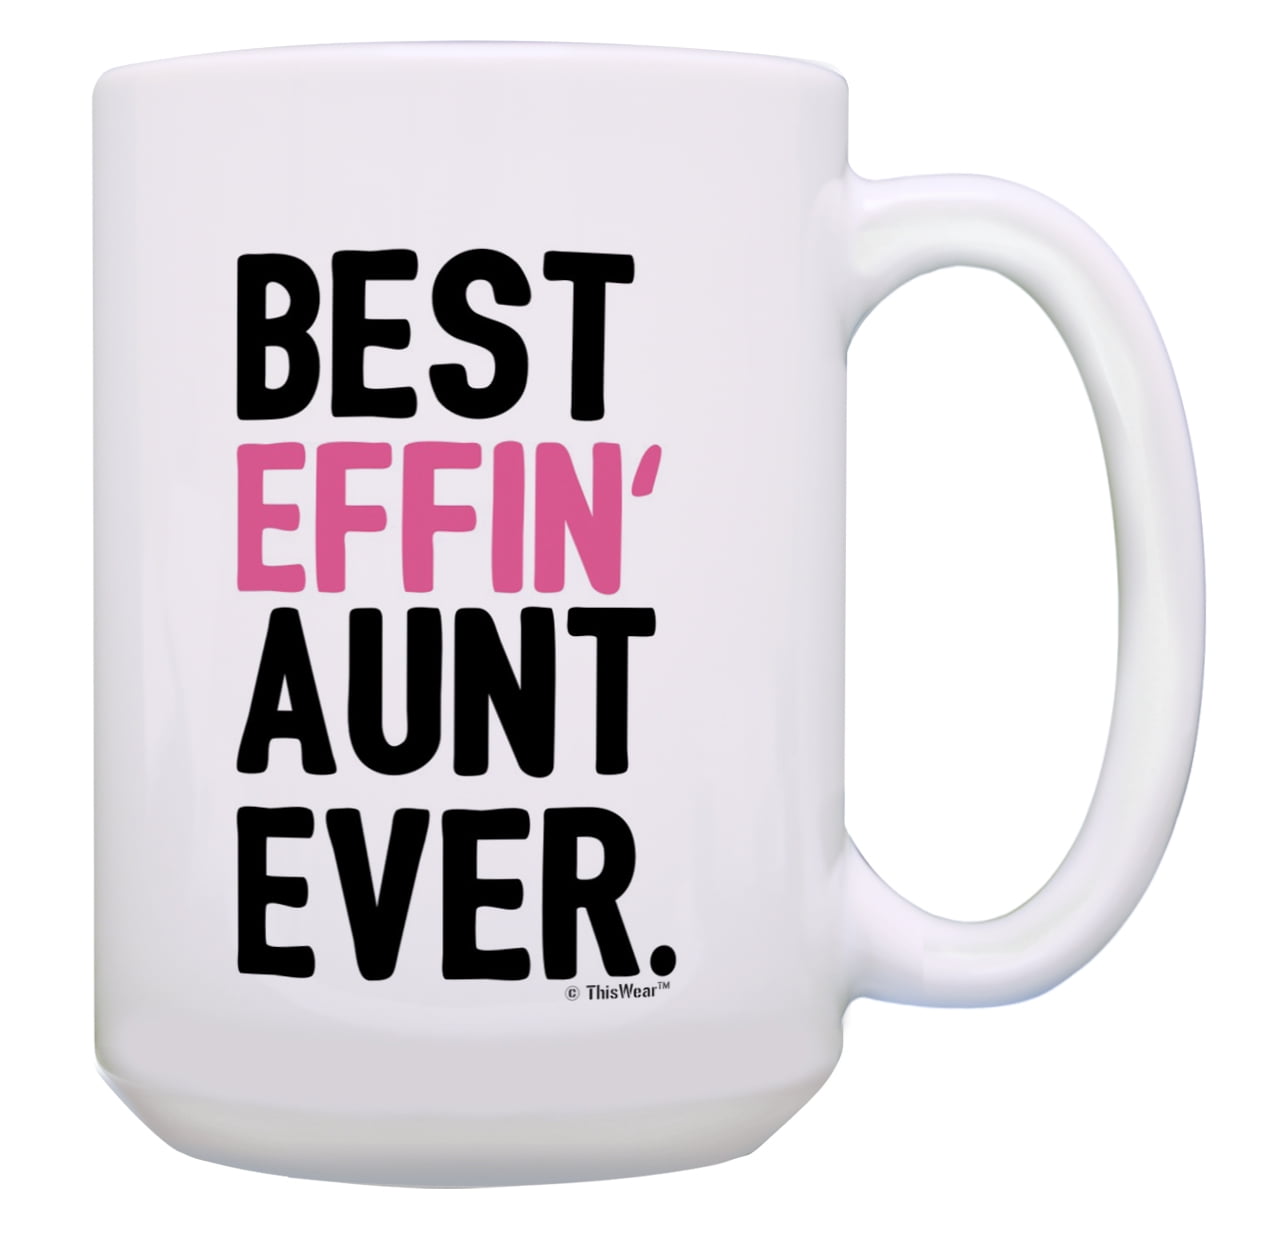 World's Best Aunty Coffee Mug Perfect gift for her